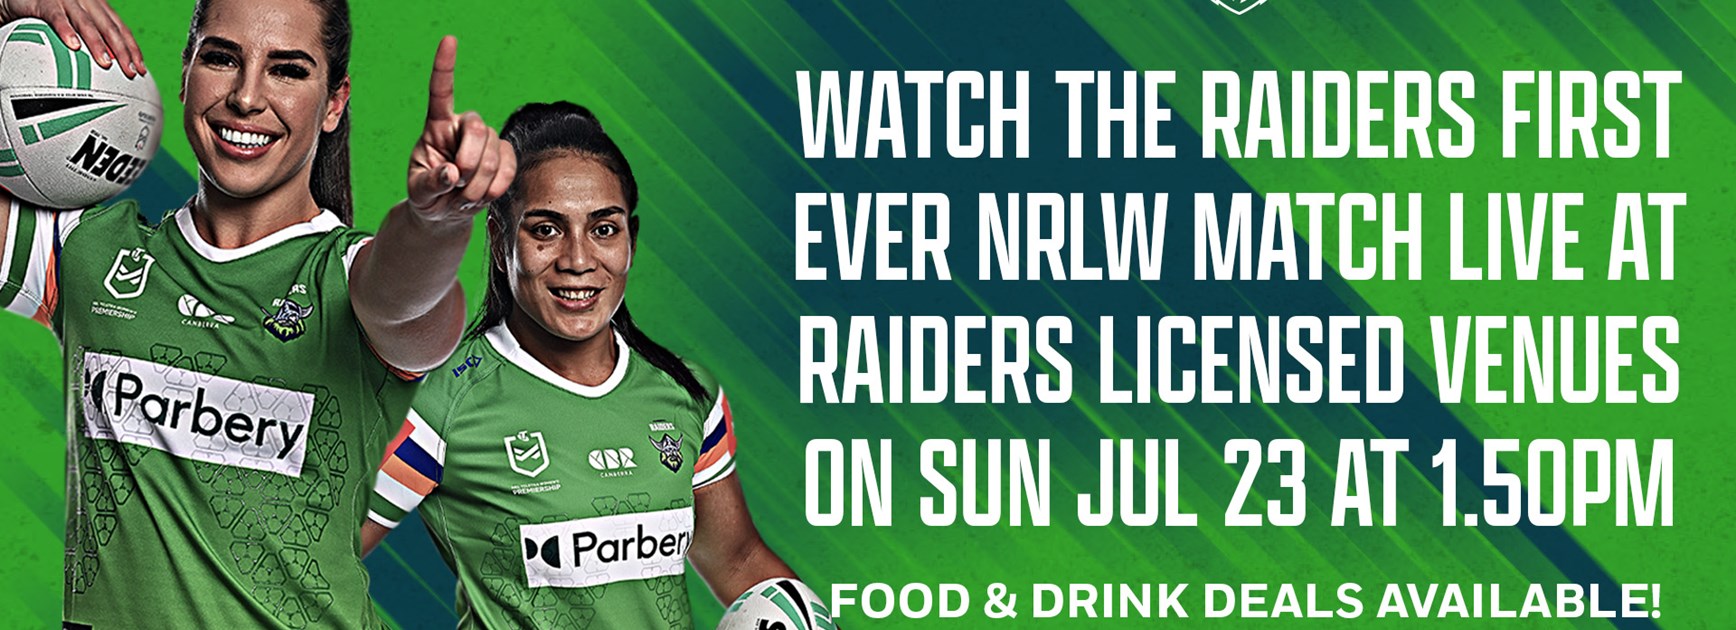 Watch the Raiders first NRLW match Live at Raiders licensed venues!